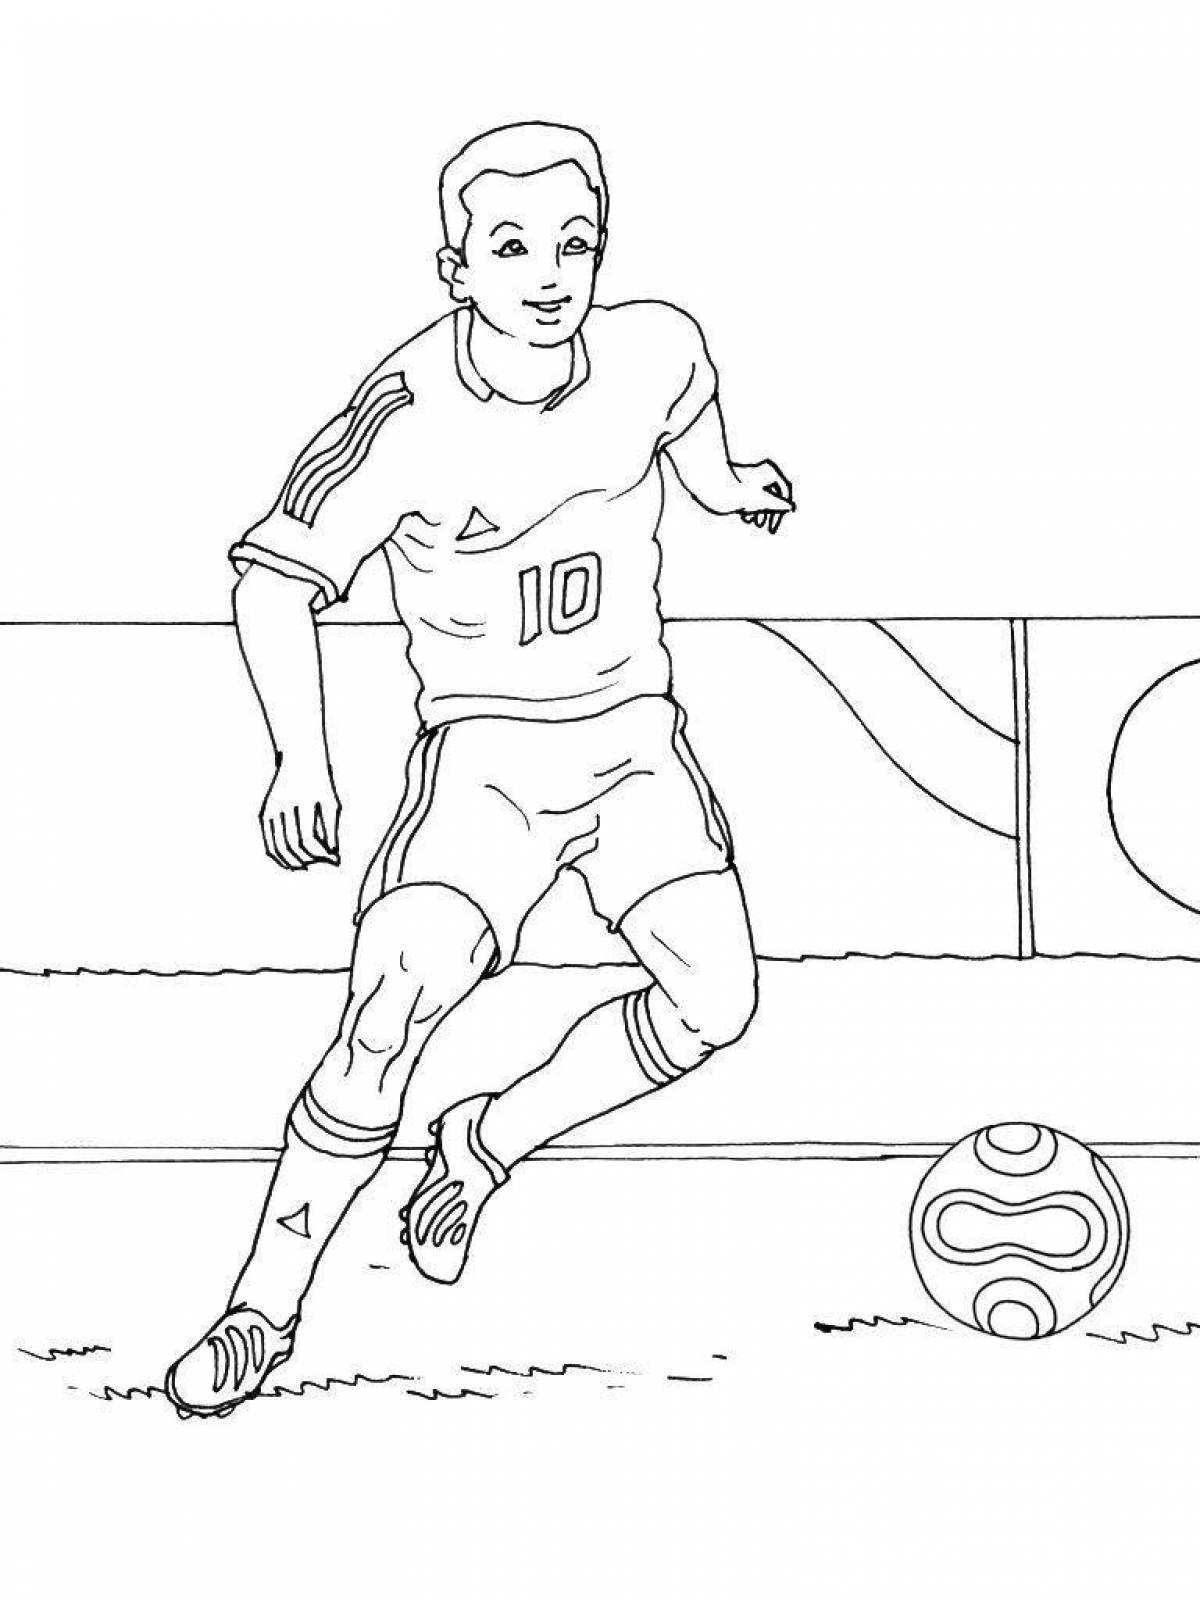 Coloring page of a cheerful football player